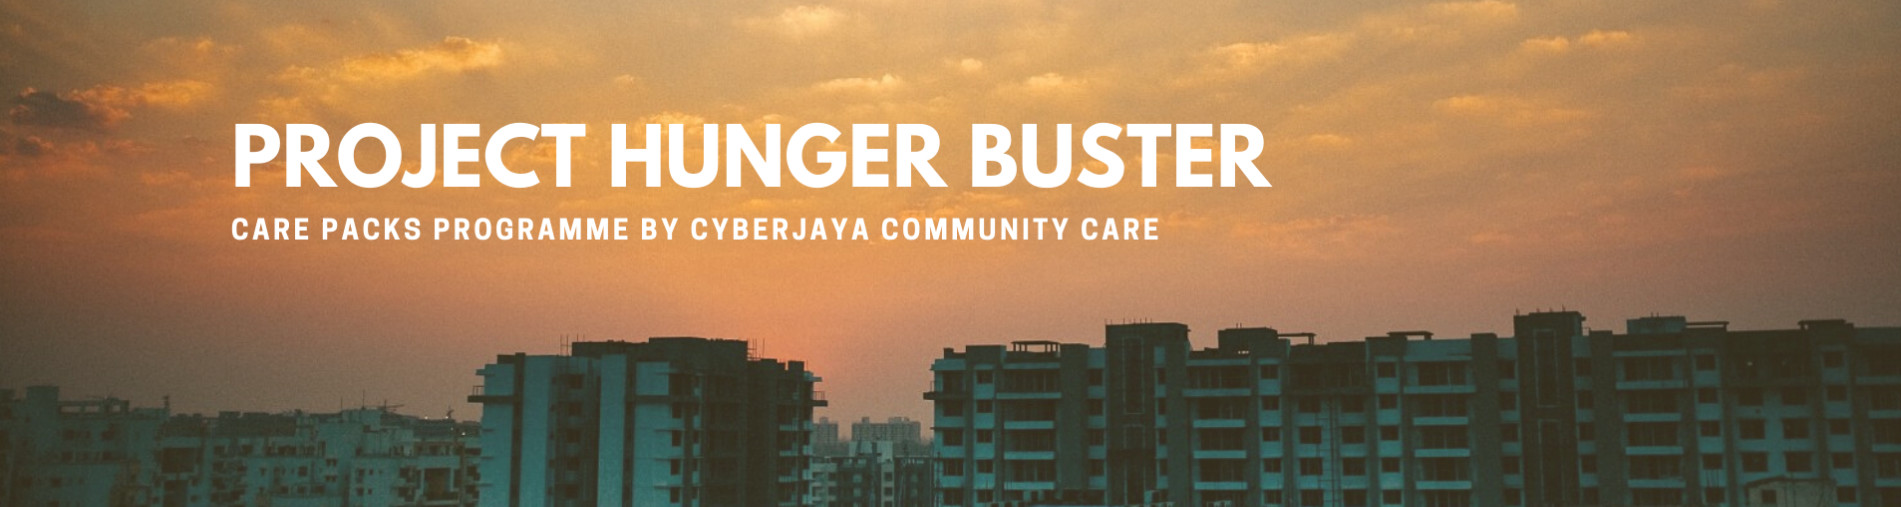 Project Hunger Buster 